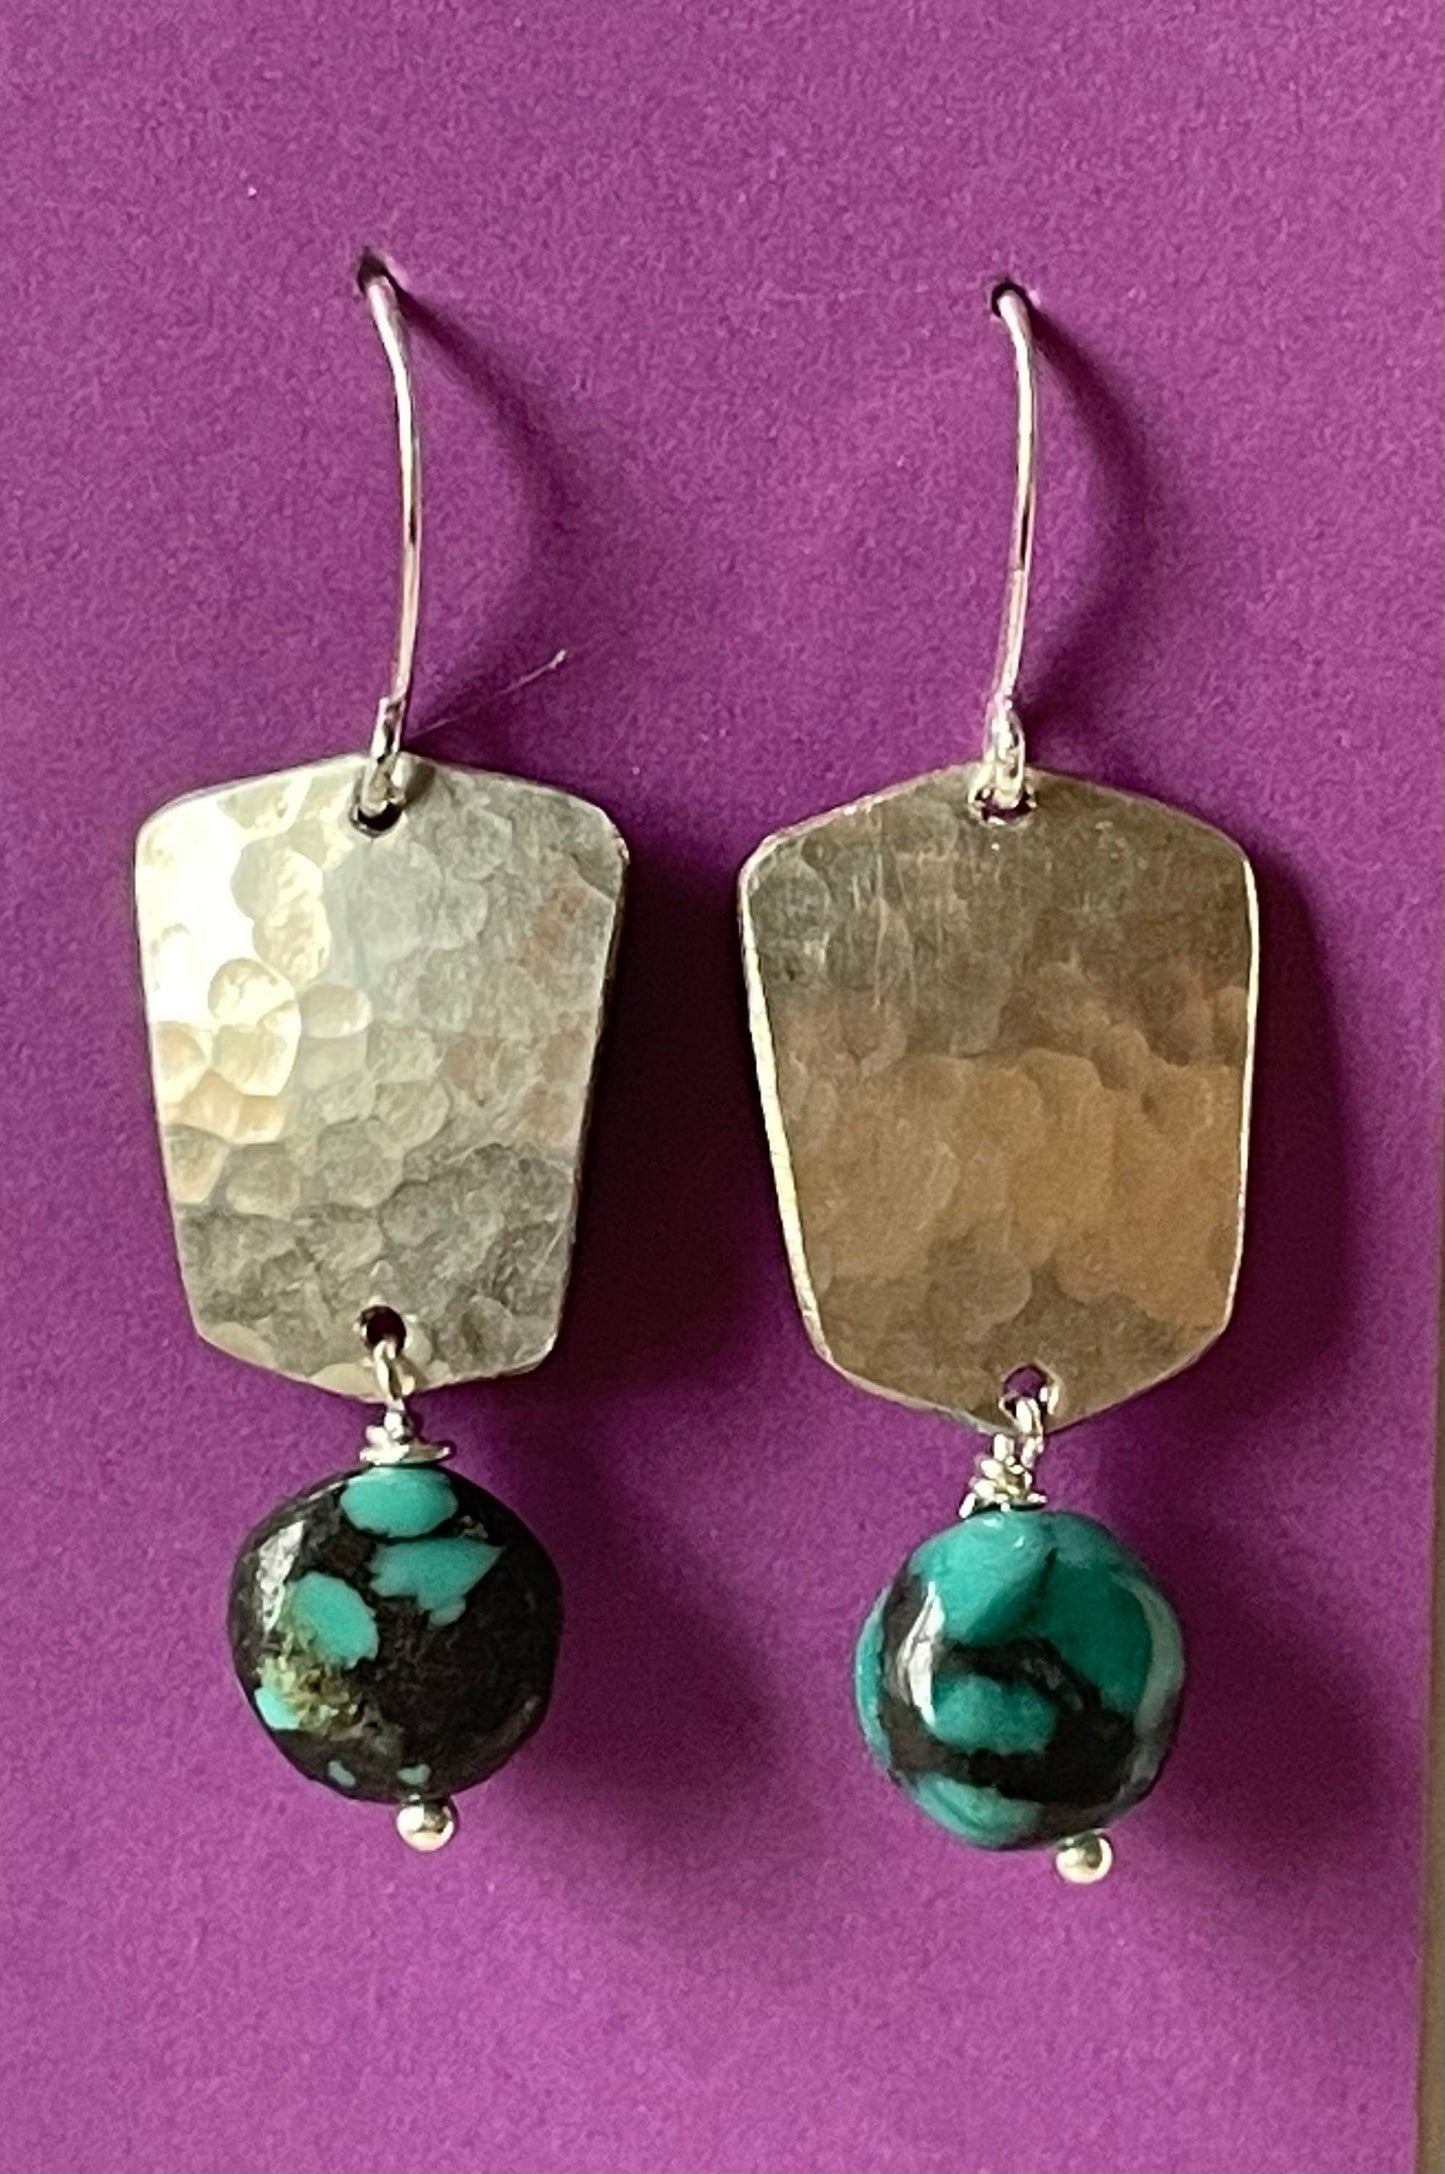 Pillow Turquoise Stones on Hammered Silver Plate "Shields" with Sterling Silver Wires